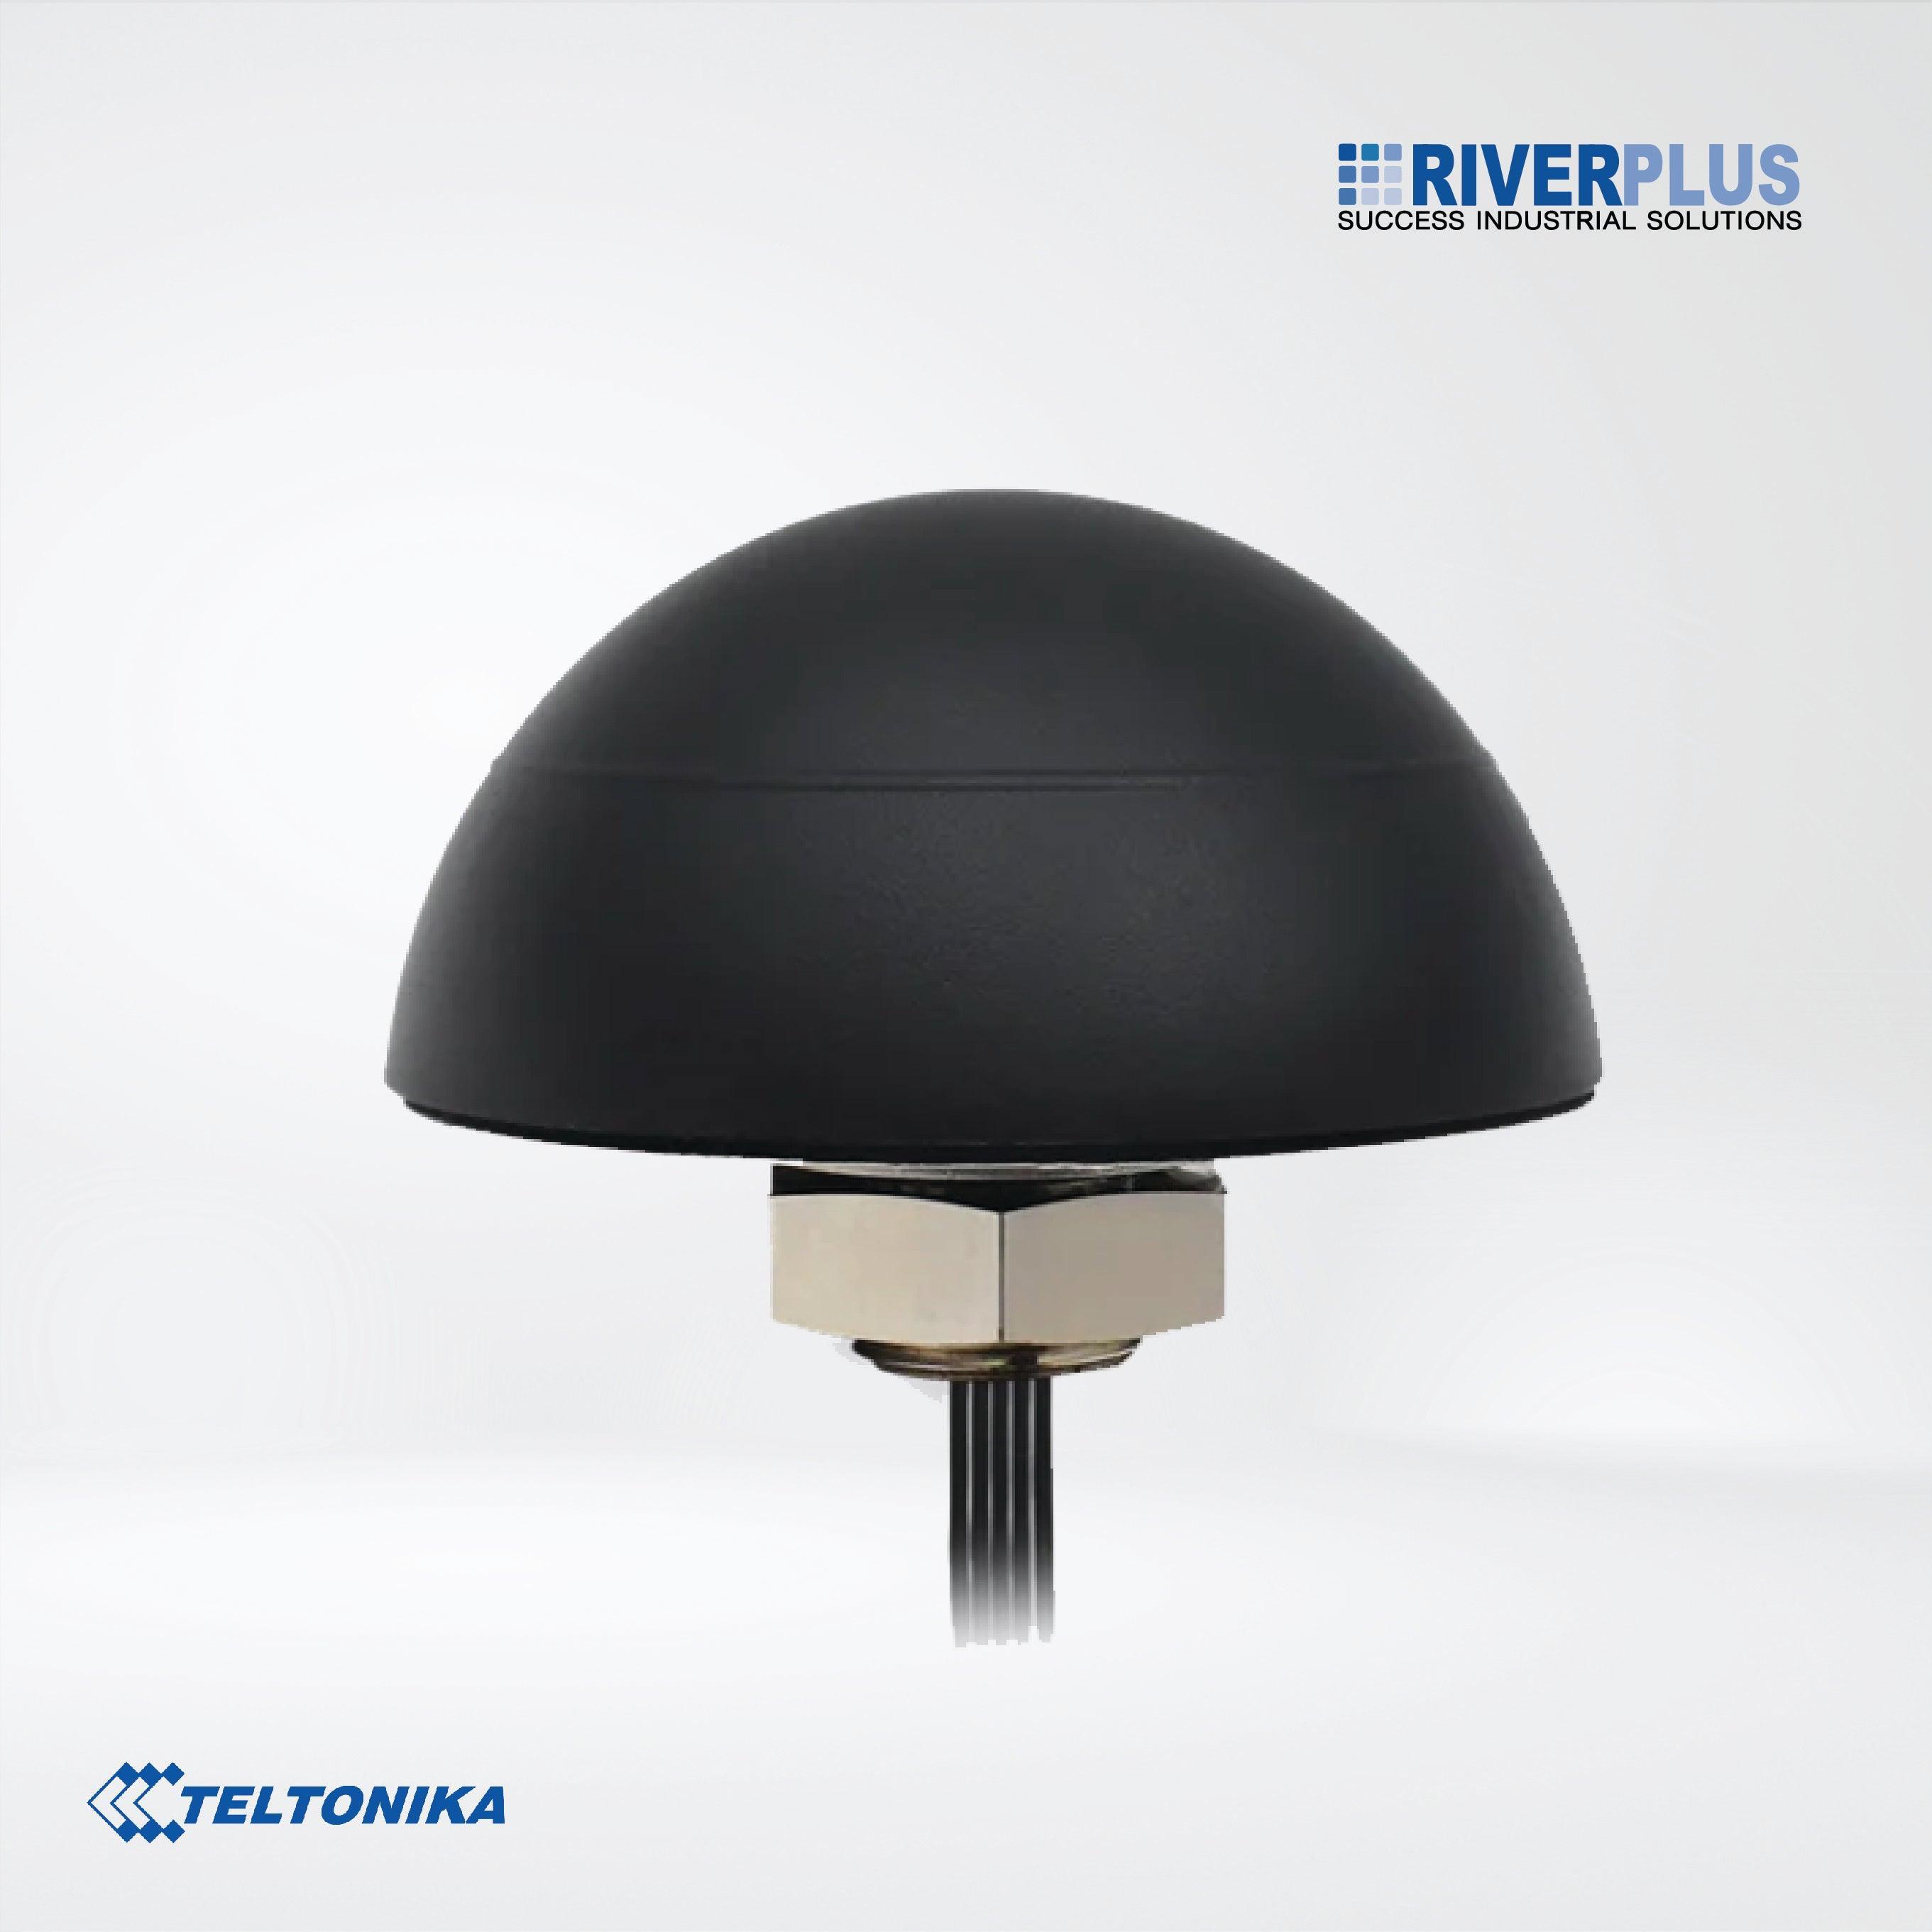 PR1KCO28 COMBO MIMO MOBILE/GNSS/WIFI ROOF SMA ANTENNA - Riverplus